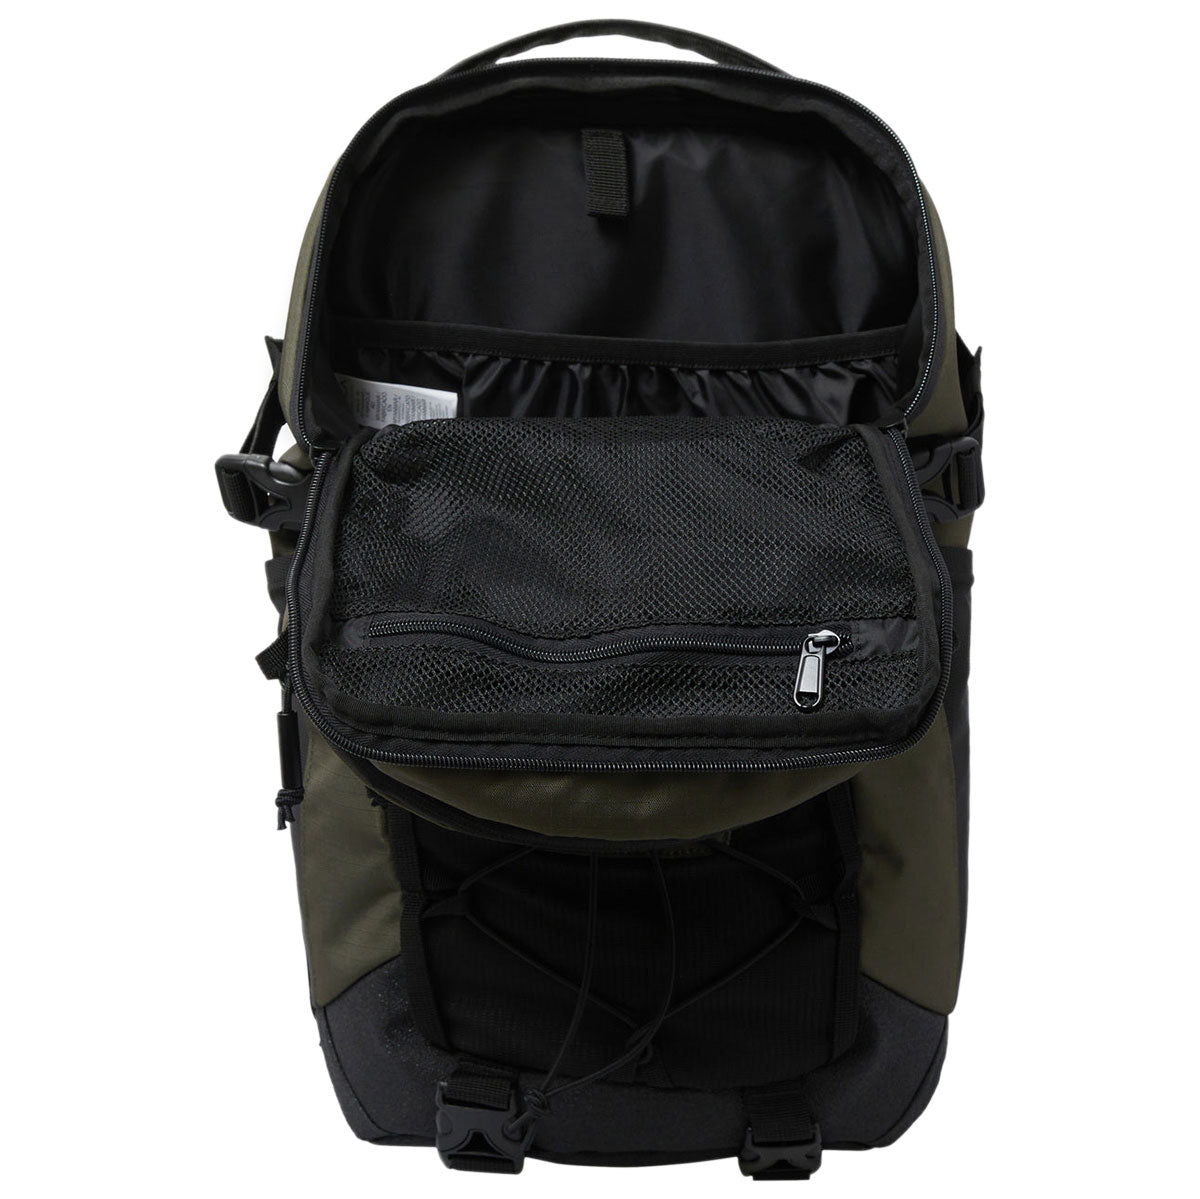 RVCA Rvca Daypack Backpack - Olive image 4